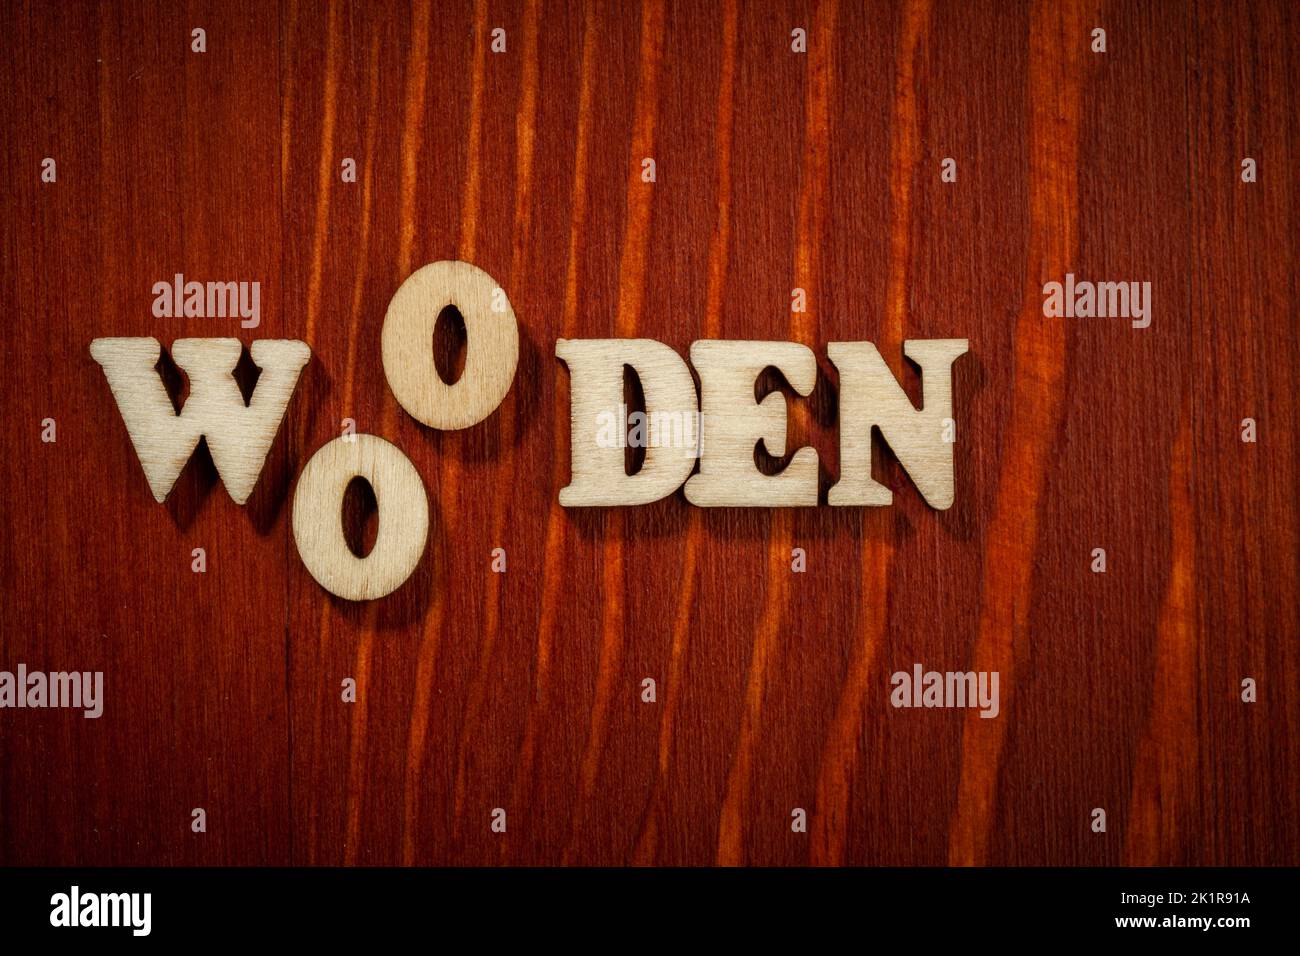 Word 'Wooden' by wood letters close up Stock Photo